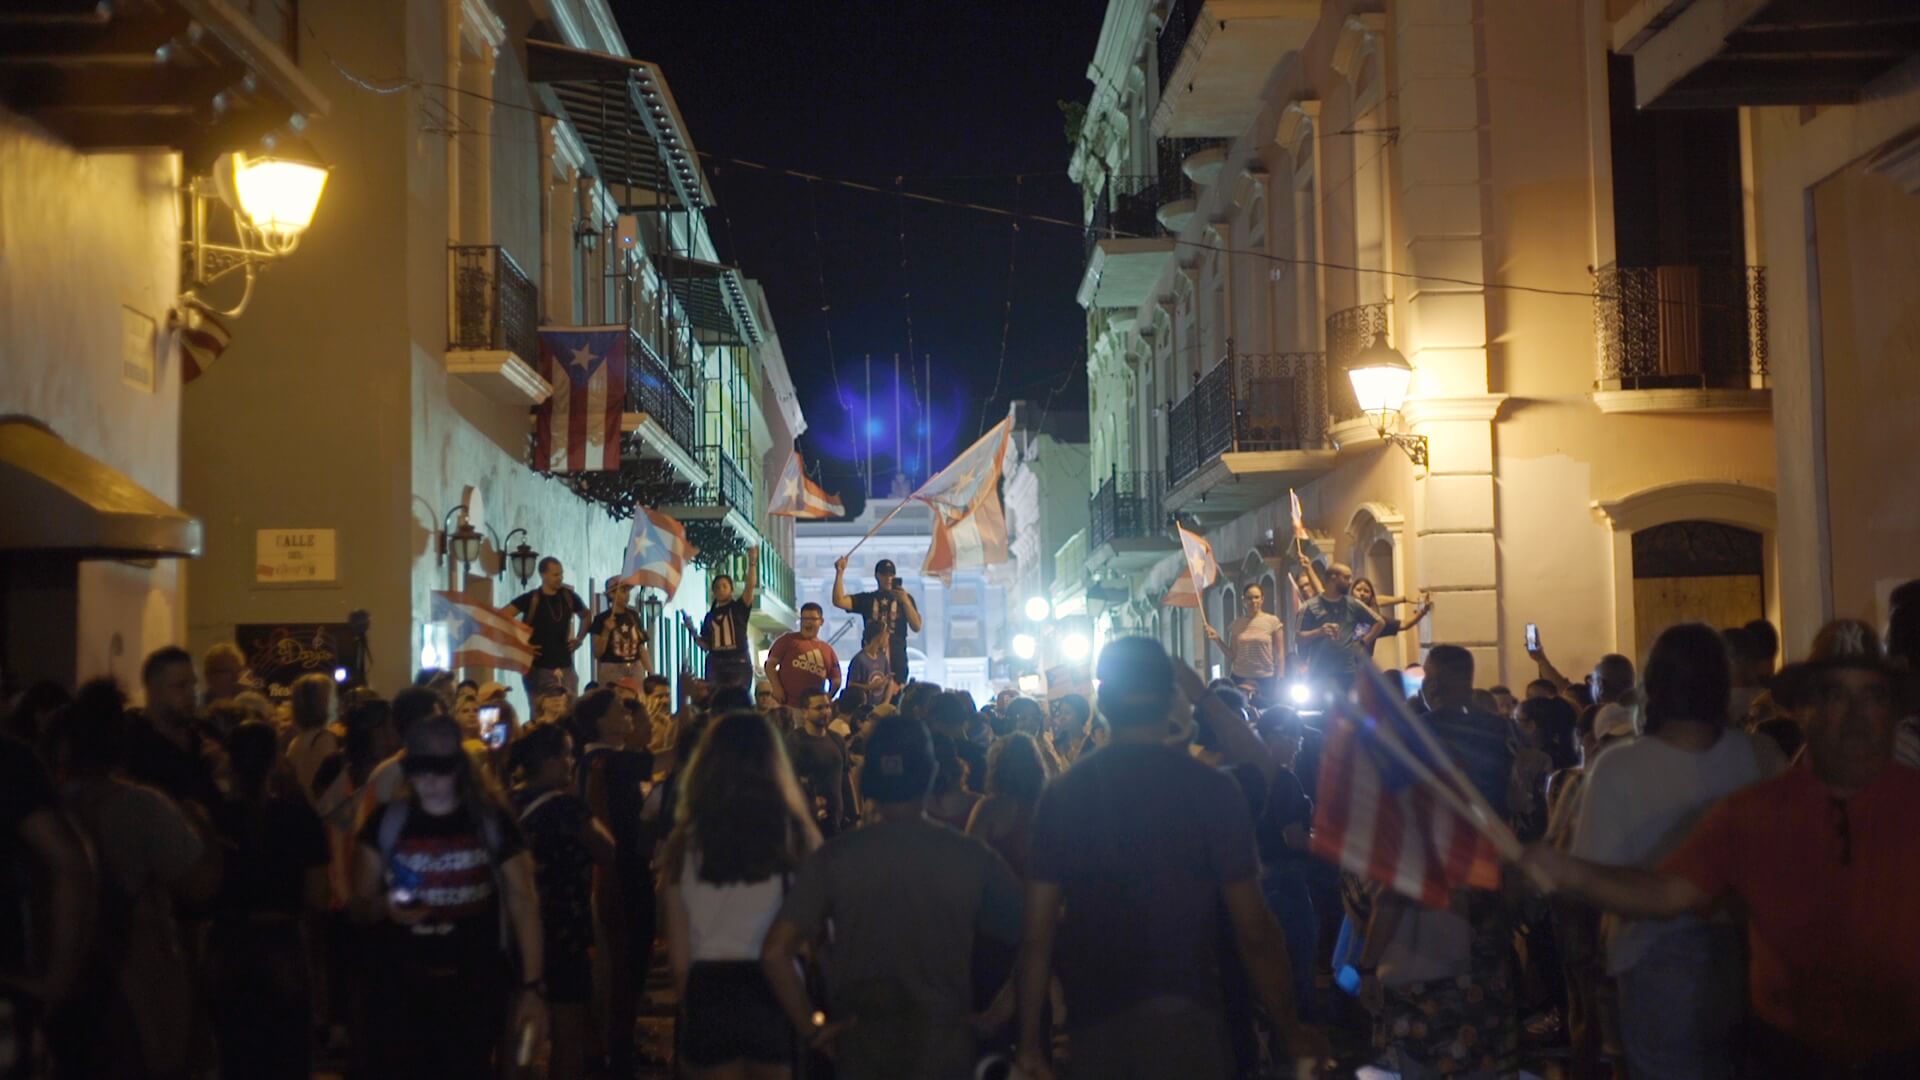 Still from Landfall. It is nighttime and in the middle of a street there is a crowd of people with flags and t-shirts with the Puerto Rican flag.